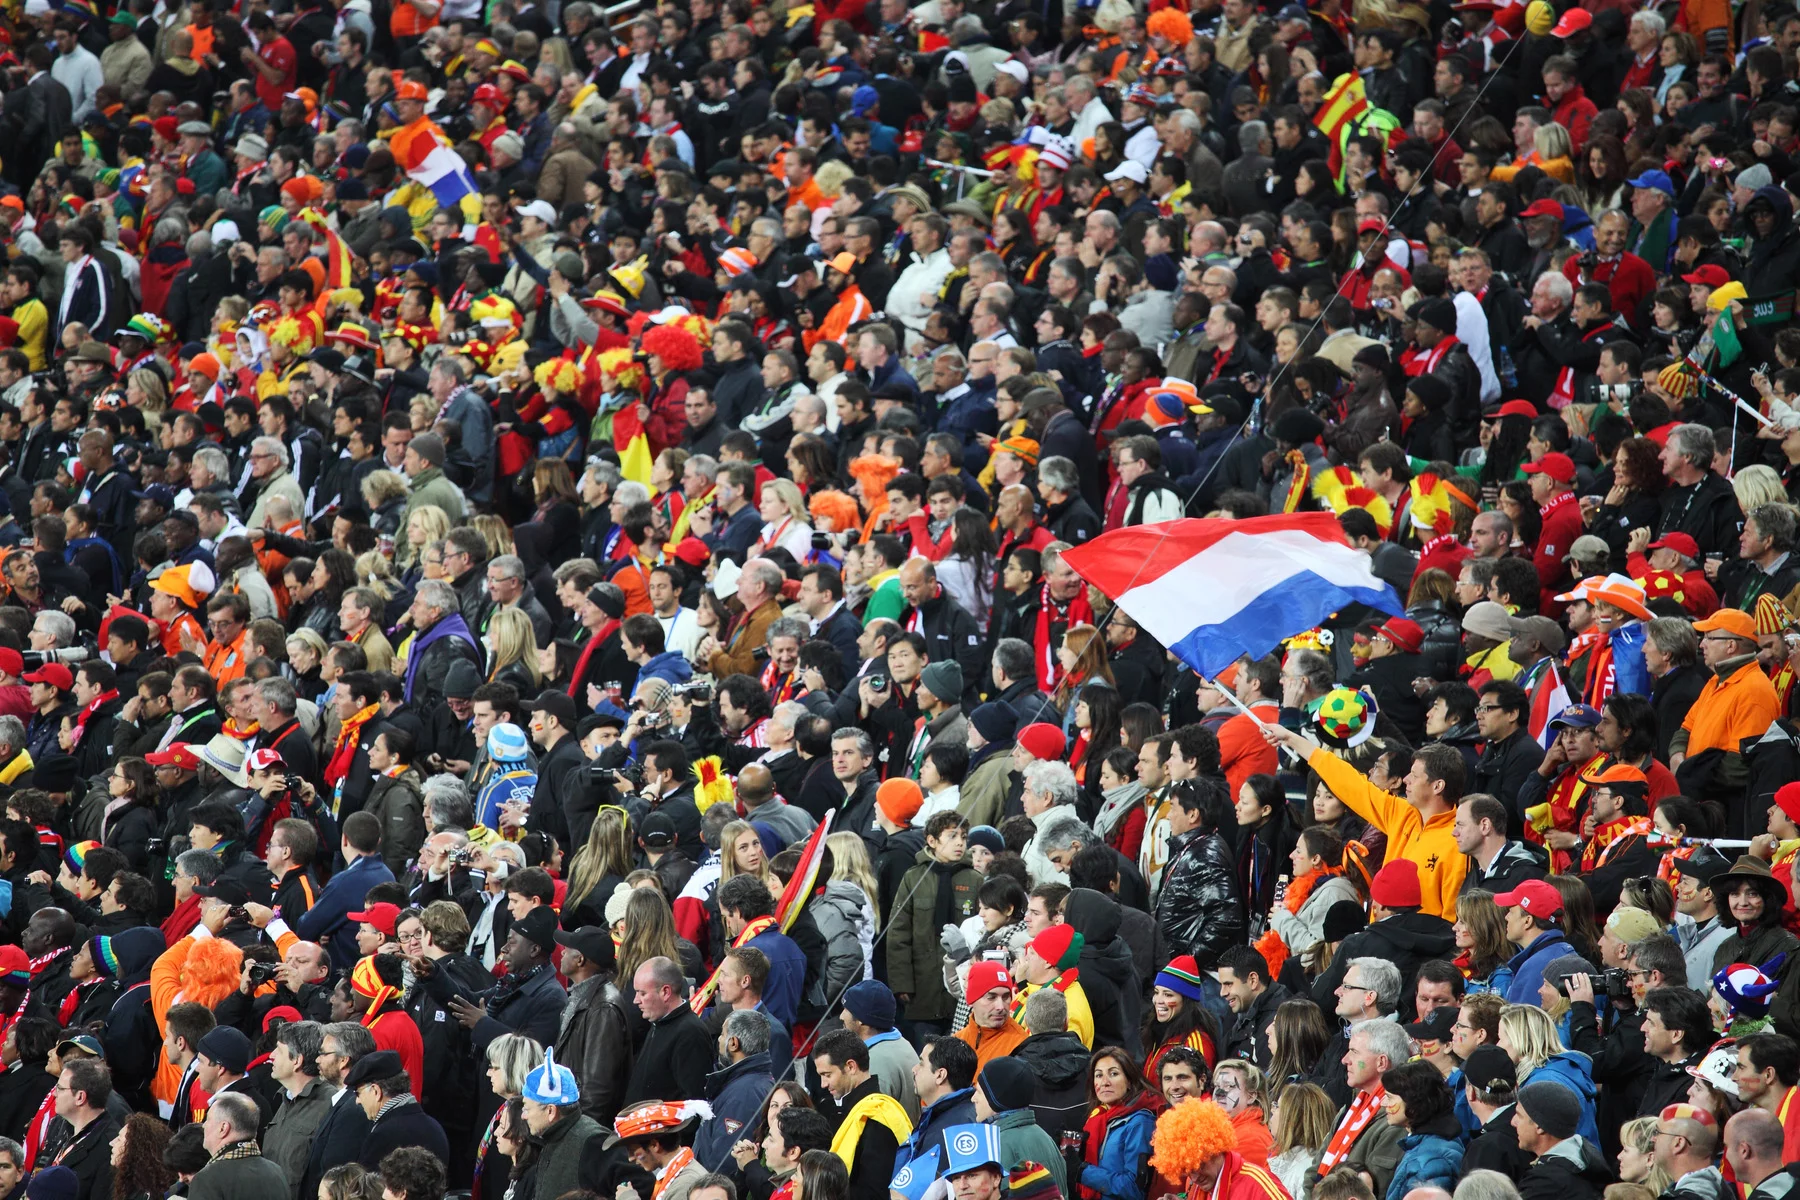 A group of Dutch football fans at the 2010 FIFA World Cup final